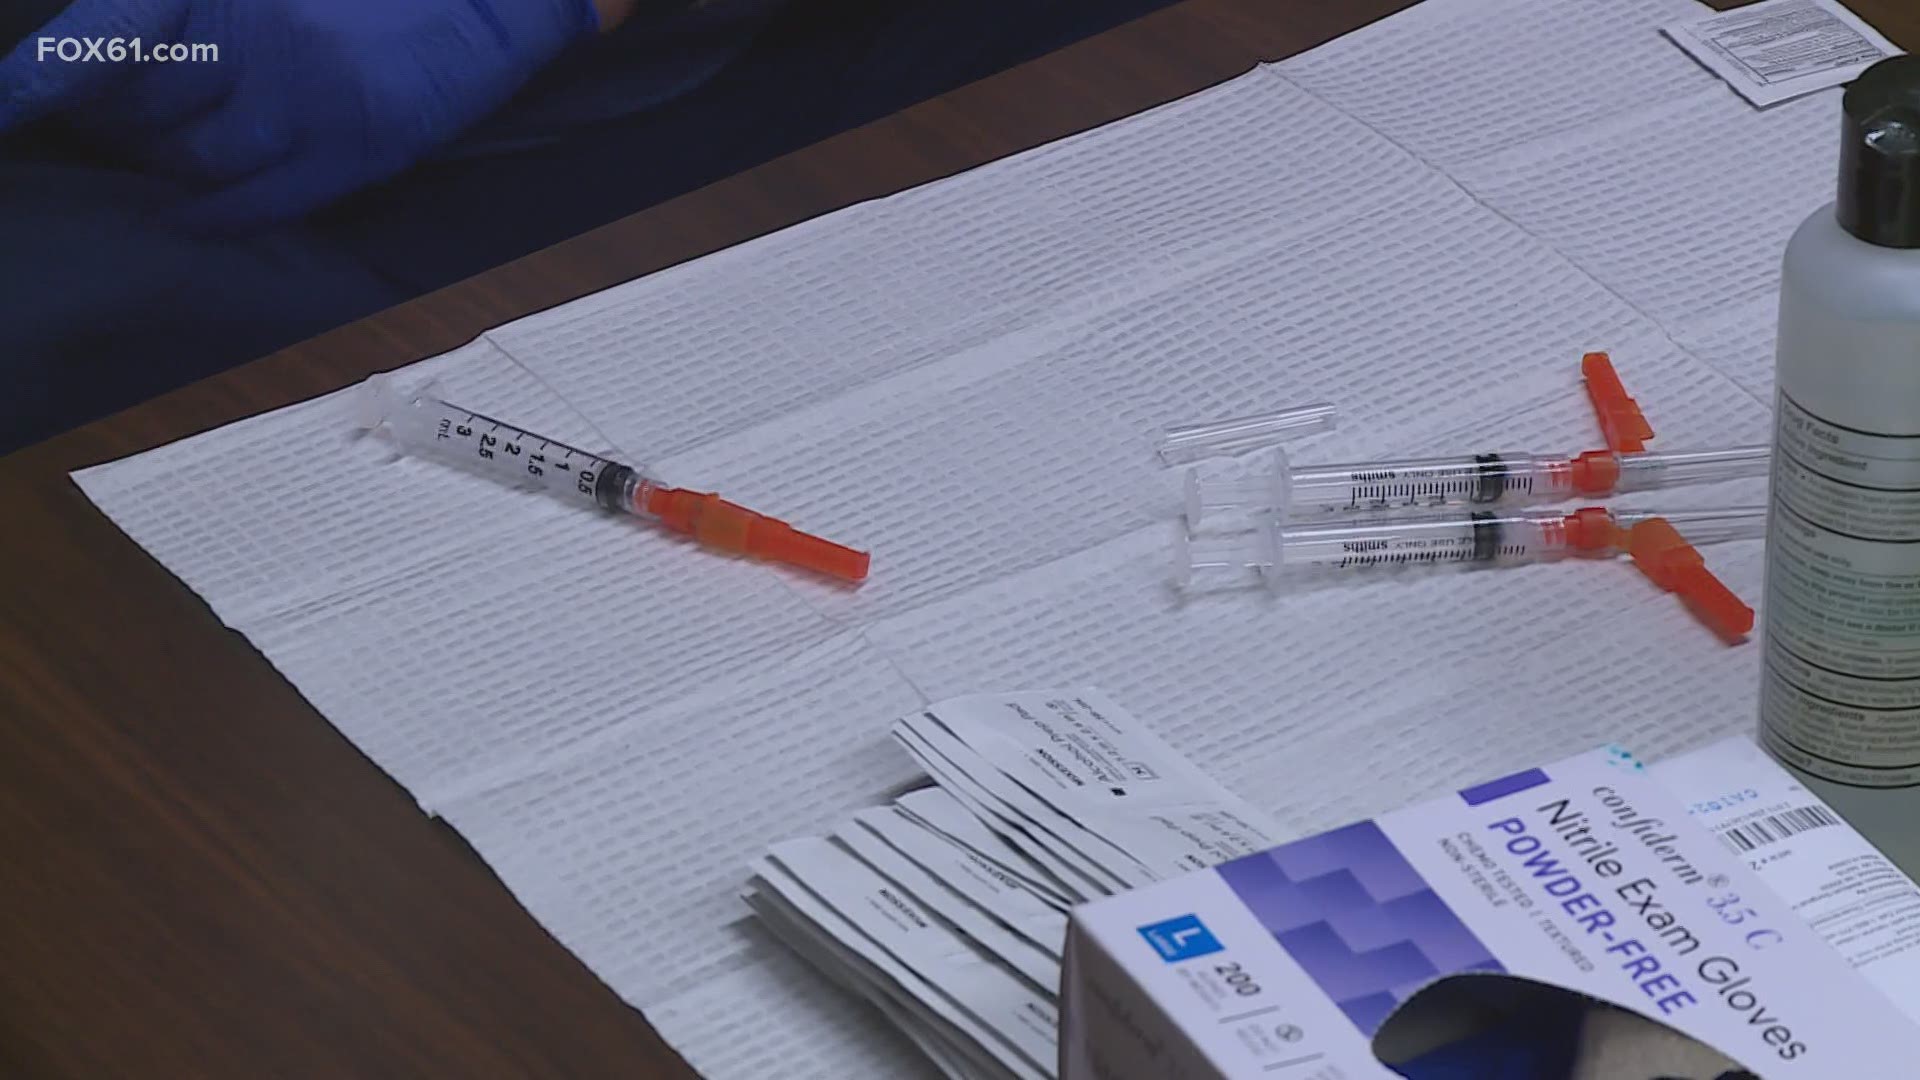 Governor Ned Lamont announced Monday that people 65 and older can start scheduling vaccine appointments Thursday.